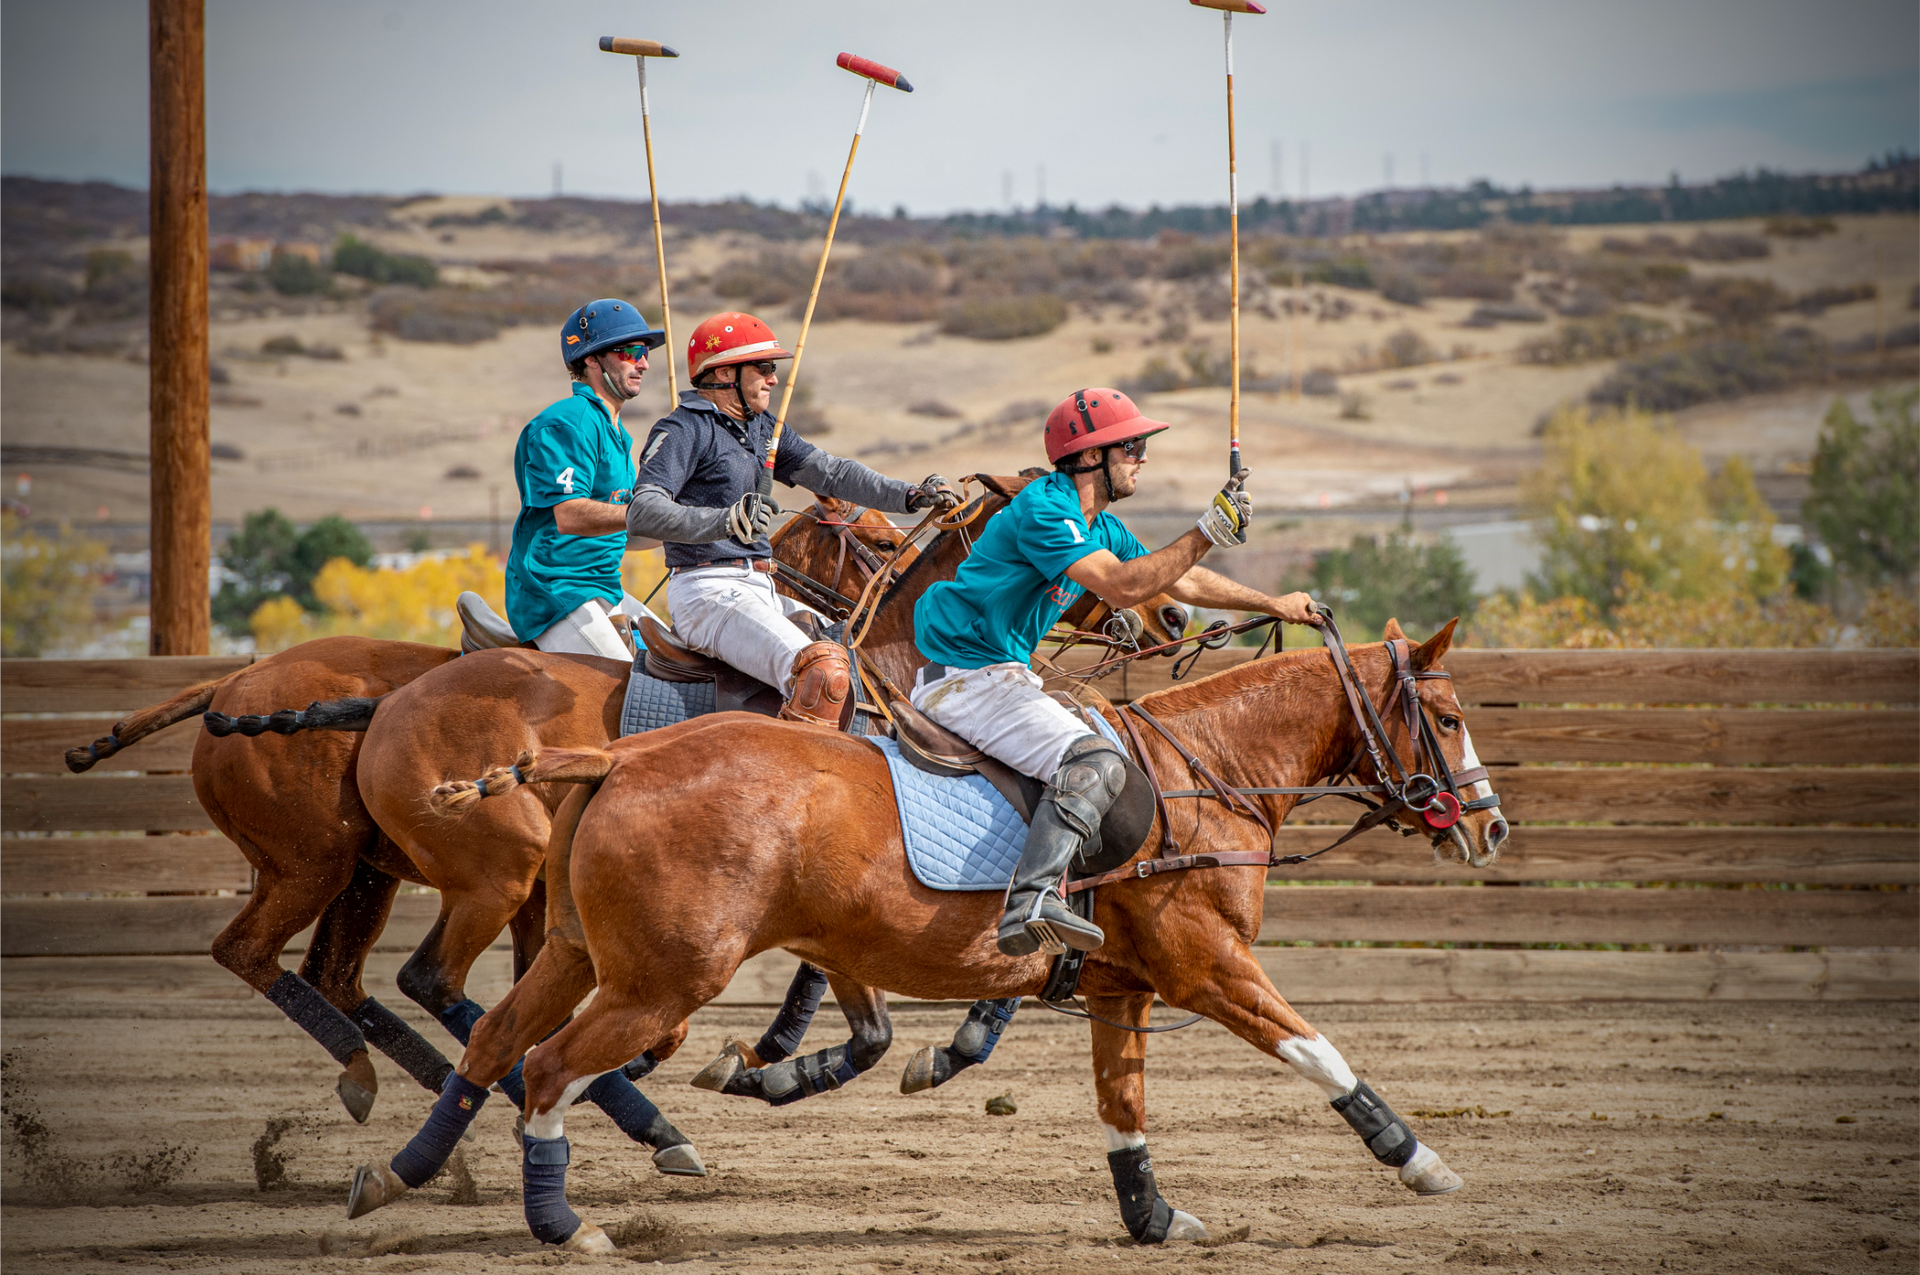 A group of people are riding horses and playing polo on a dirt field.